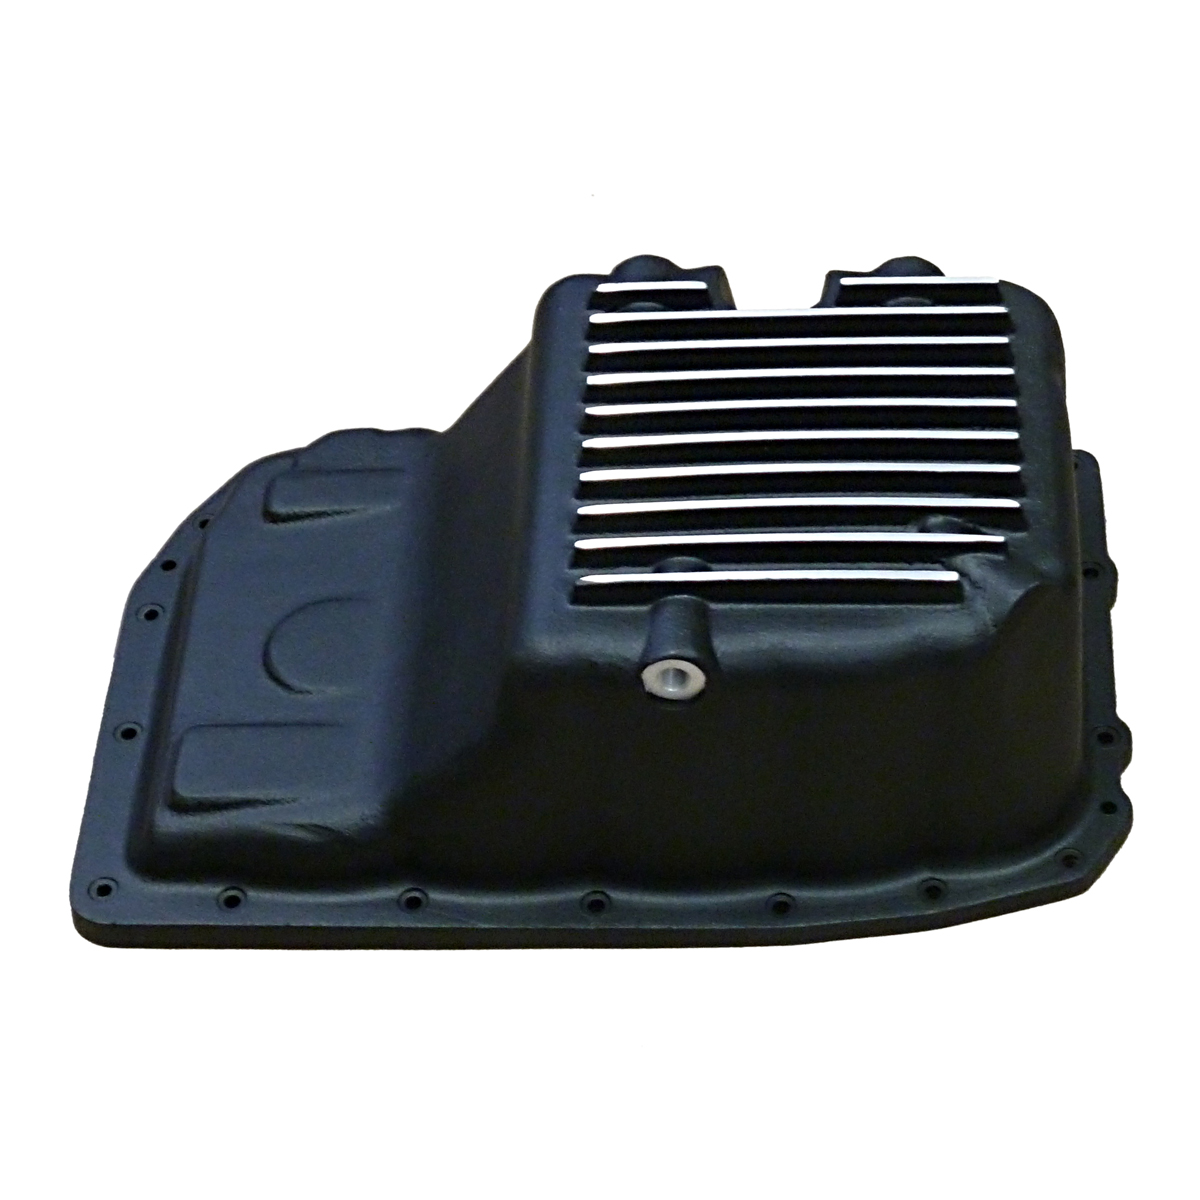 PML offers a New Heavy Duty Transmission Pan for Chevy and GM Trucks and SUV’s